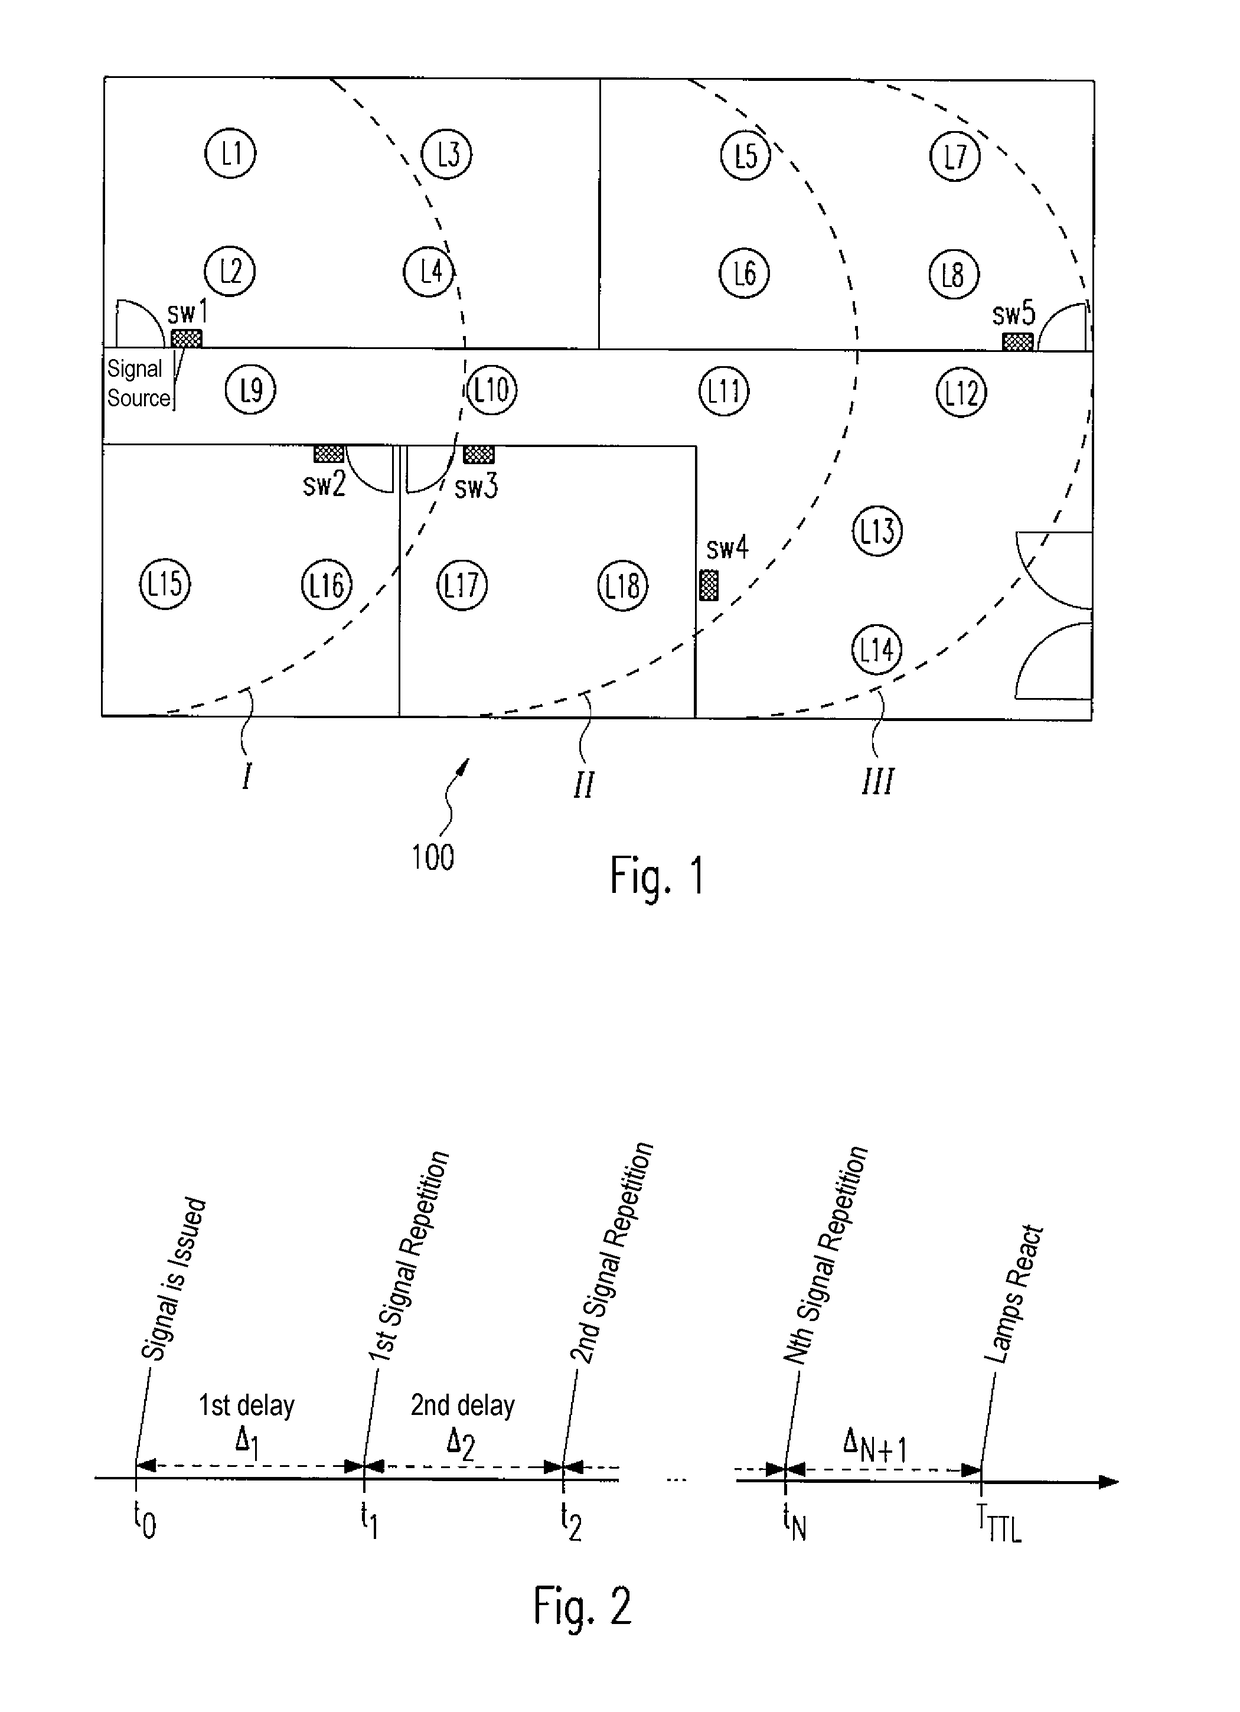 Method and System for Transmitting Control Commands for Units in a Distributed Arrangement